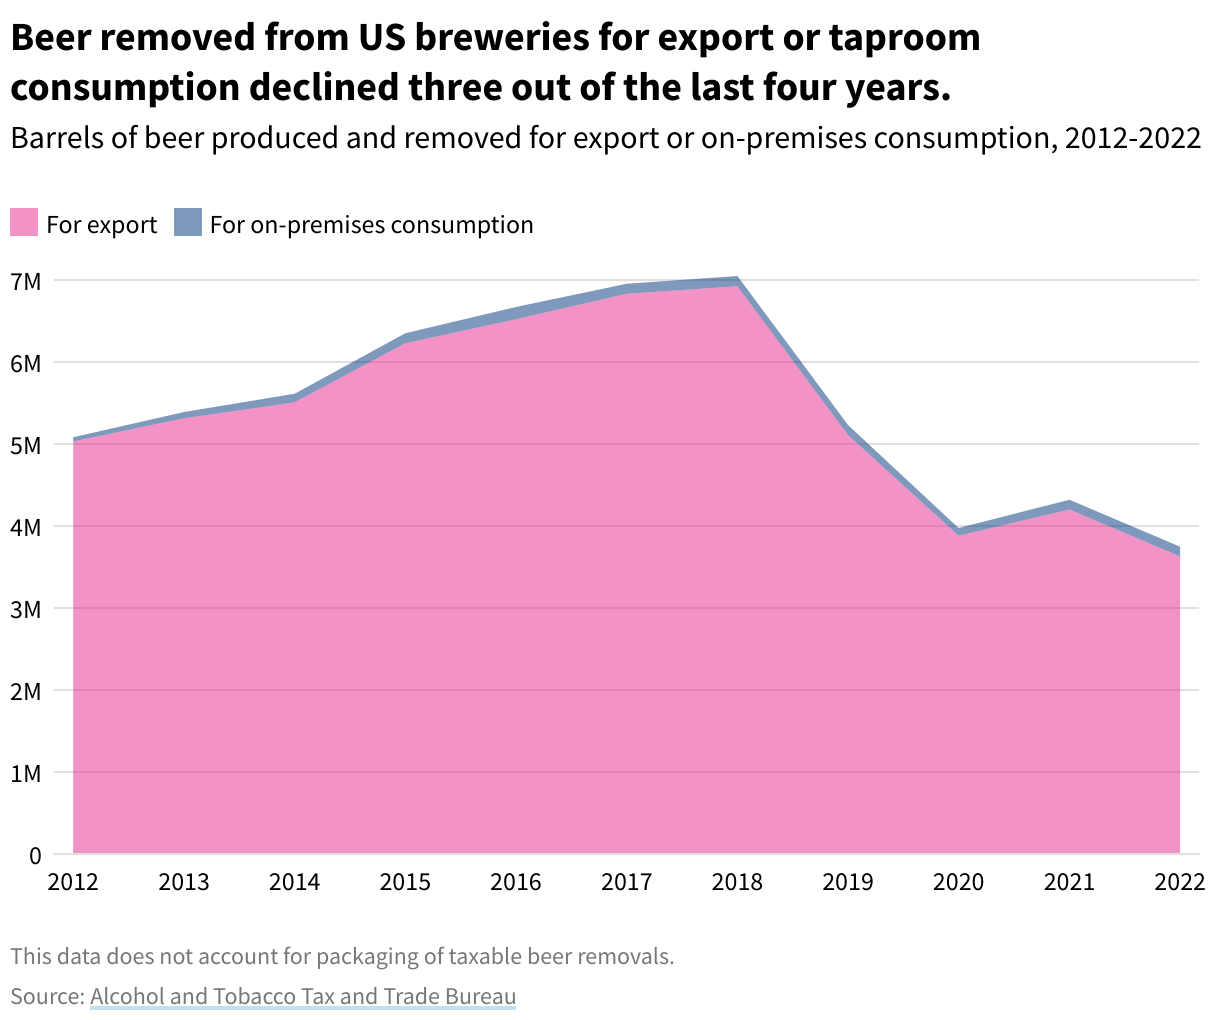 Area chart showing barrels of US beer produced for export and on-premises consumption, with both declining  since 2018.